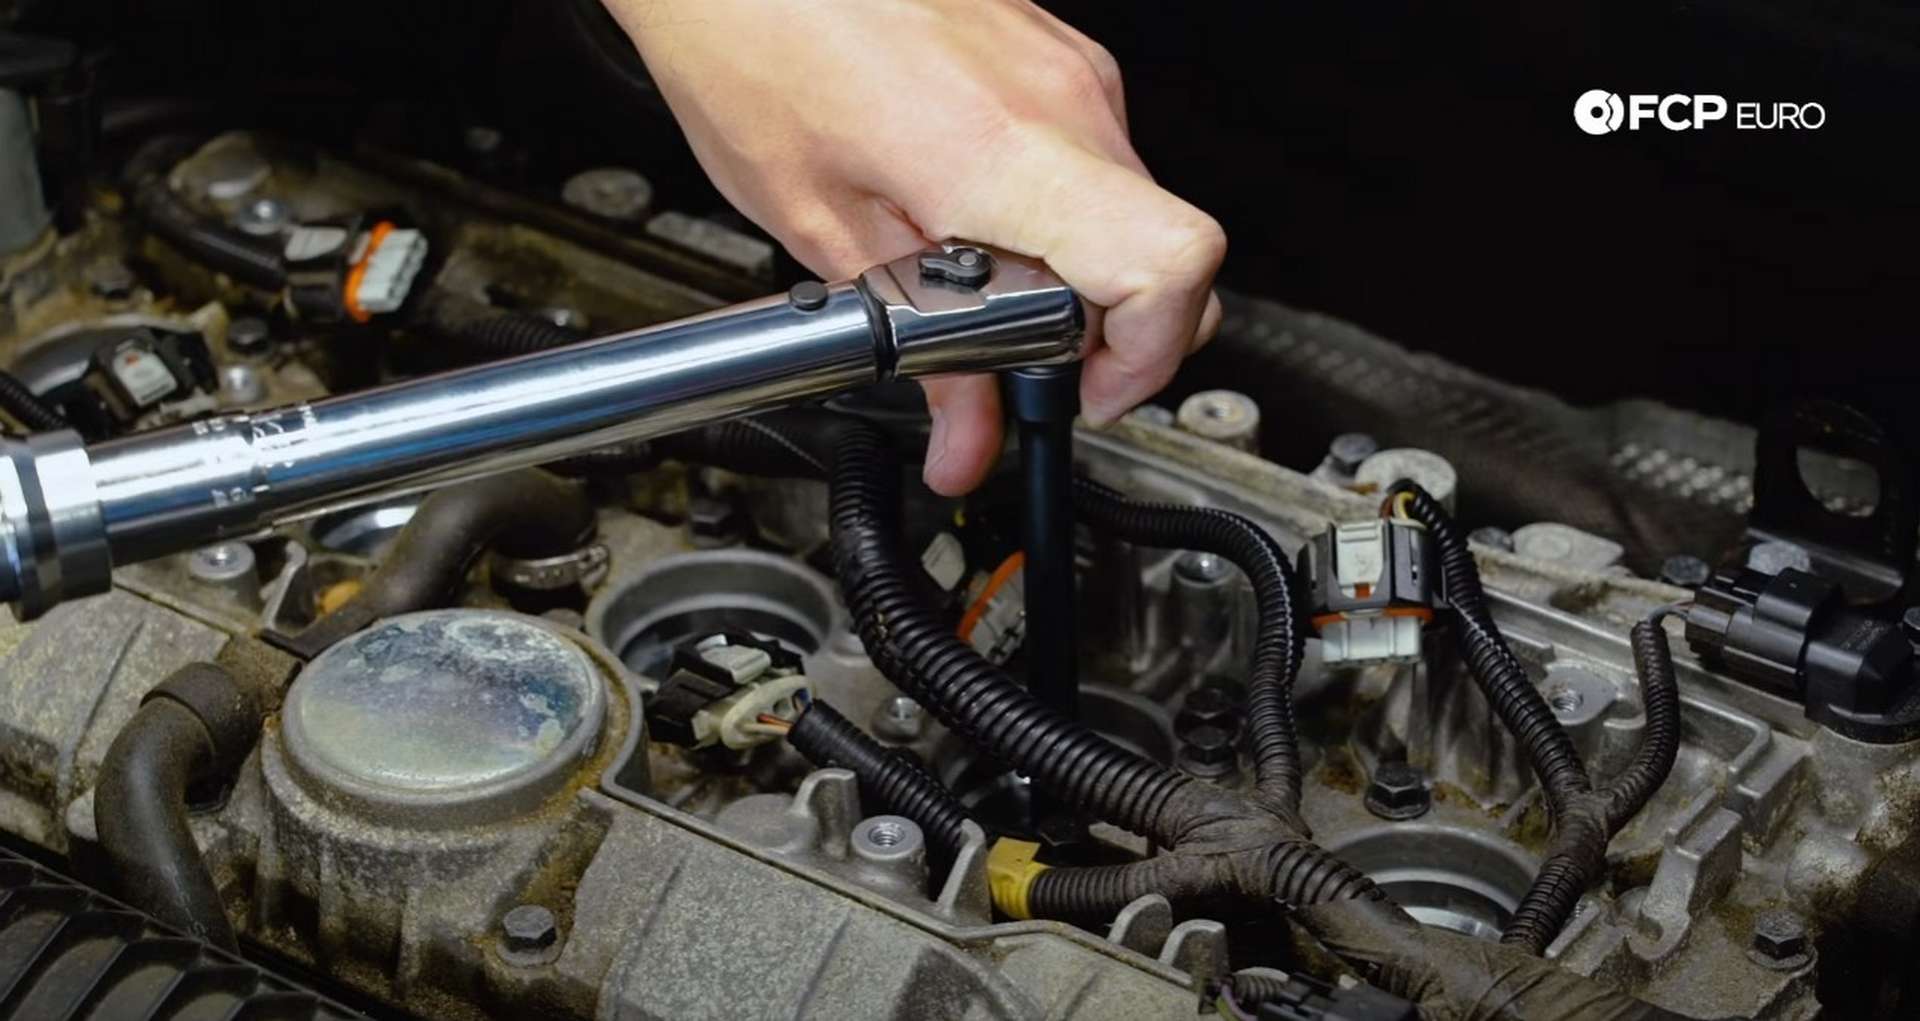 DIY Volvo Spark Plug and Ignition Coil Replacement torquing the new spark plugs